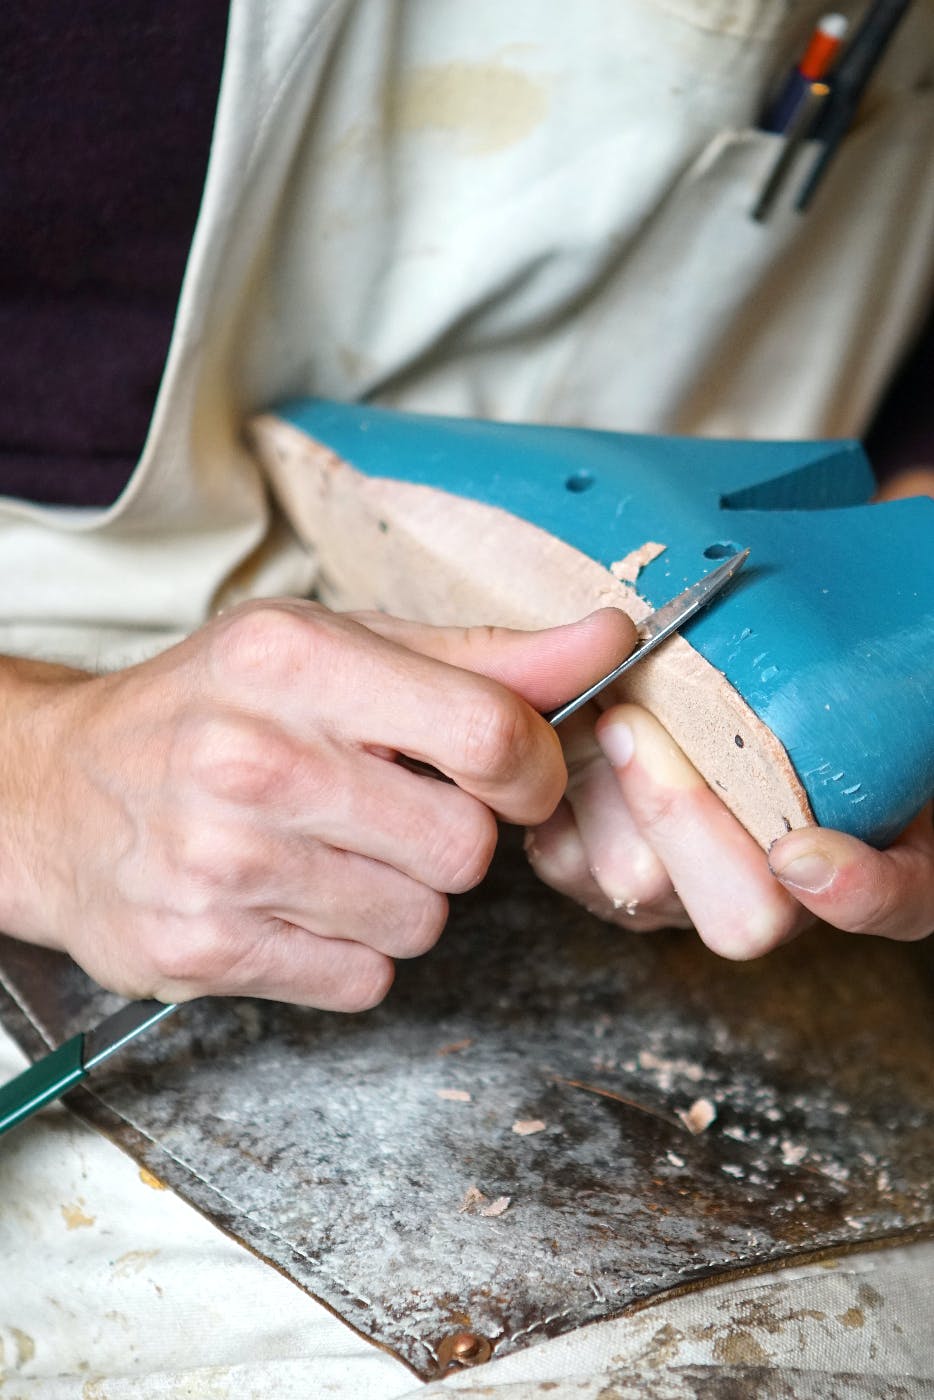 a person carving footwear